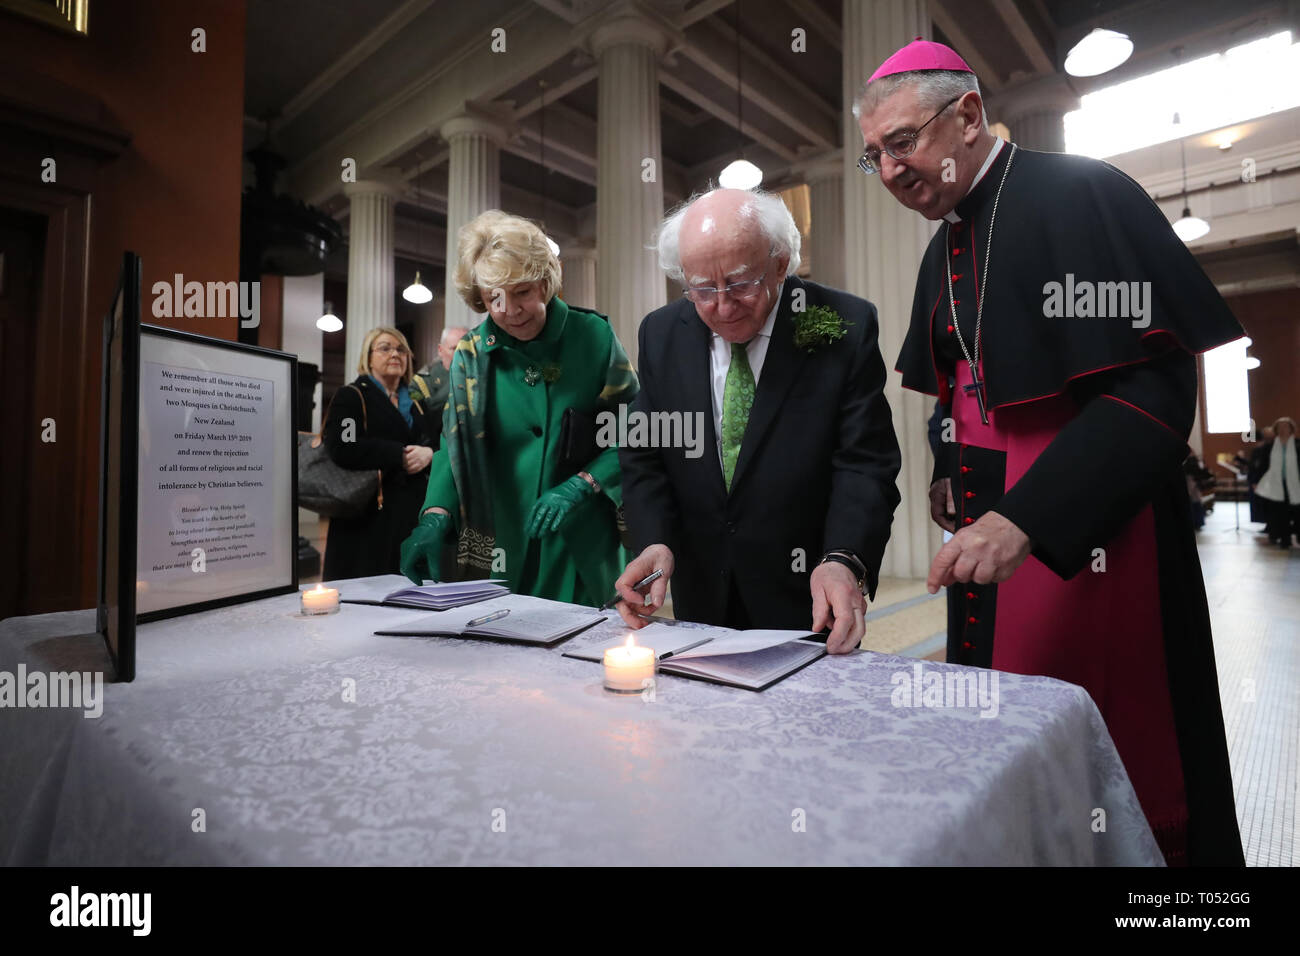 President Michael D Higgins and his wife Sabina sign a book of condolence before a memorial service for the victims of the New Zealand Mosque attacks at St Marys Pro Cathederal in Dublin. Stock Photo